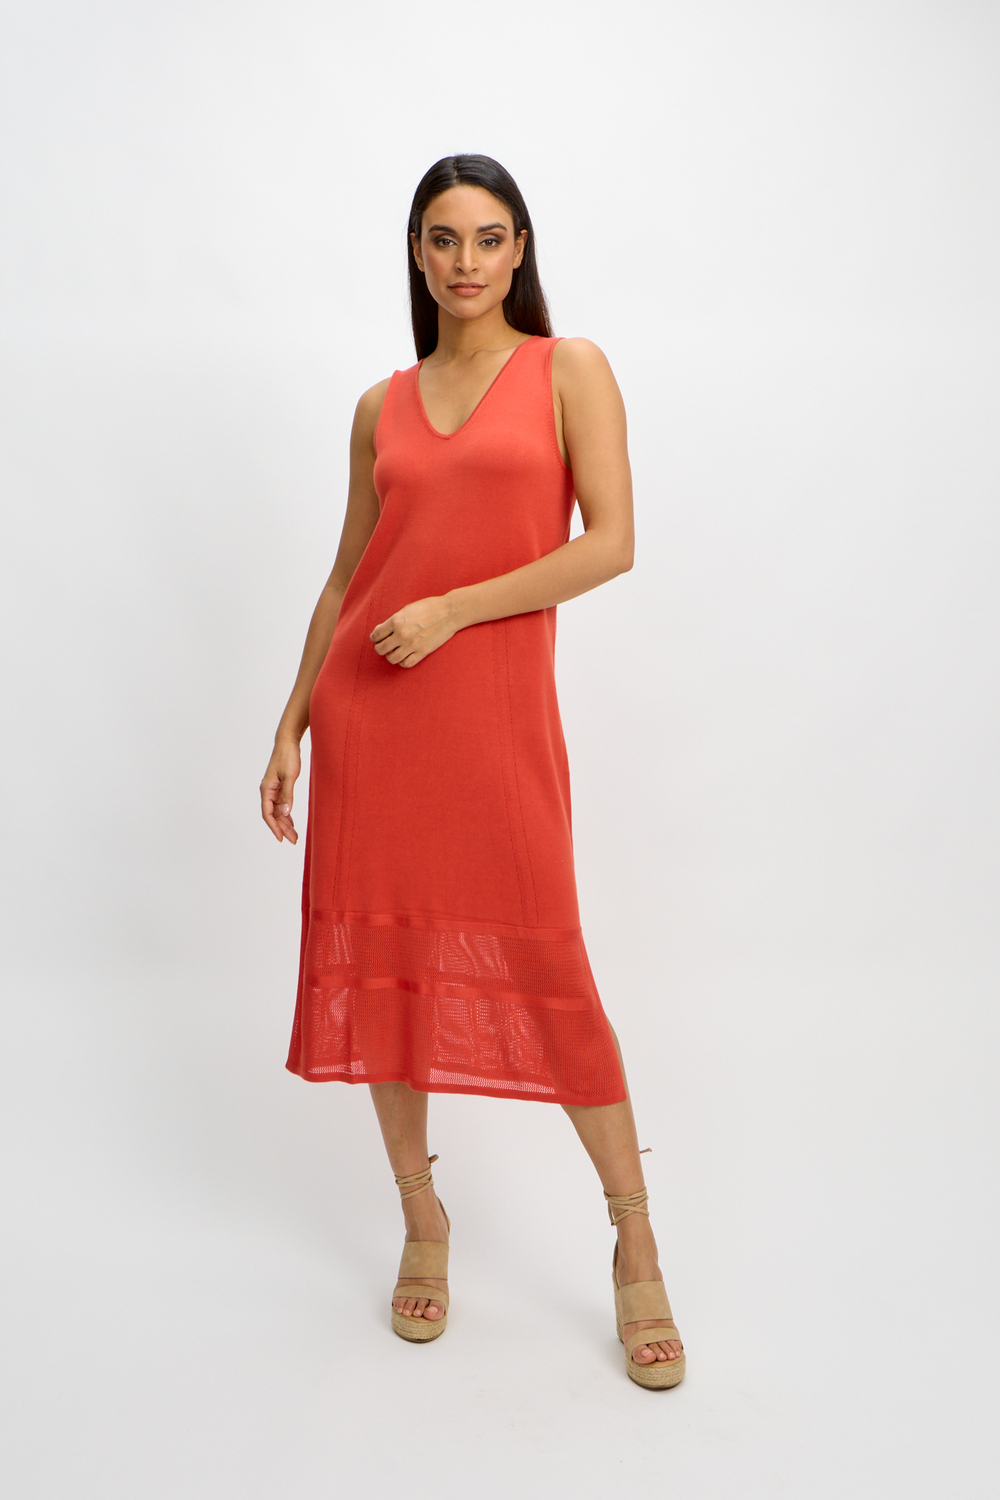 Dress style SP2423. Deep Coral